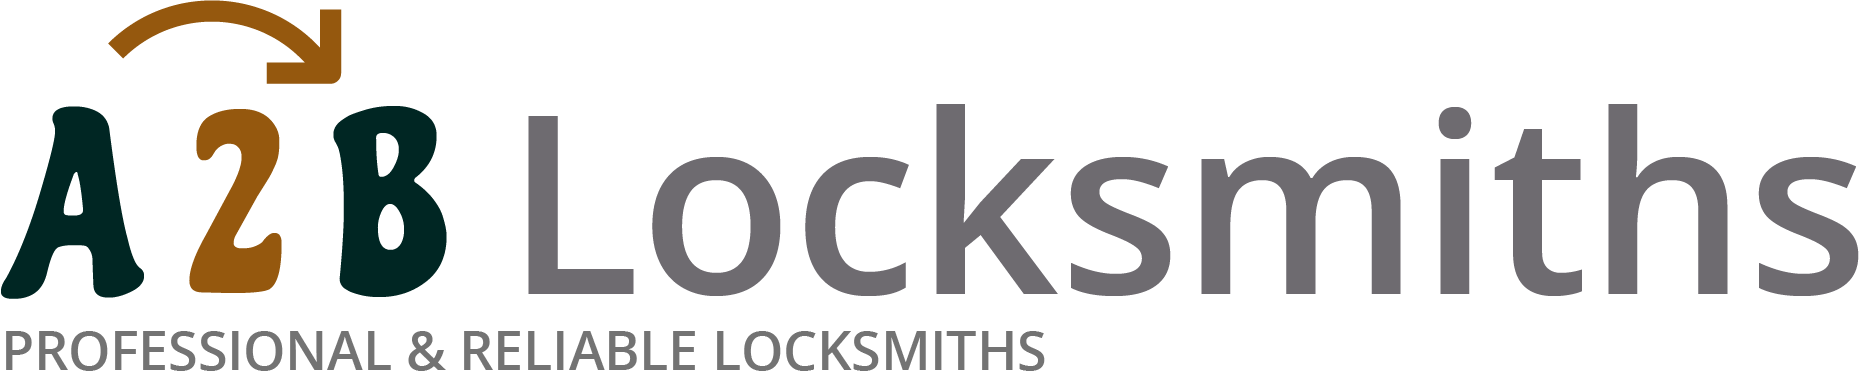 If you are locked out of house in Buckingham, our 24/7 local emergency locksmith services can help you.